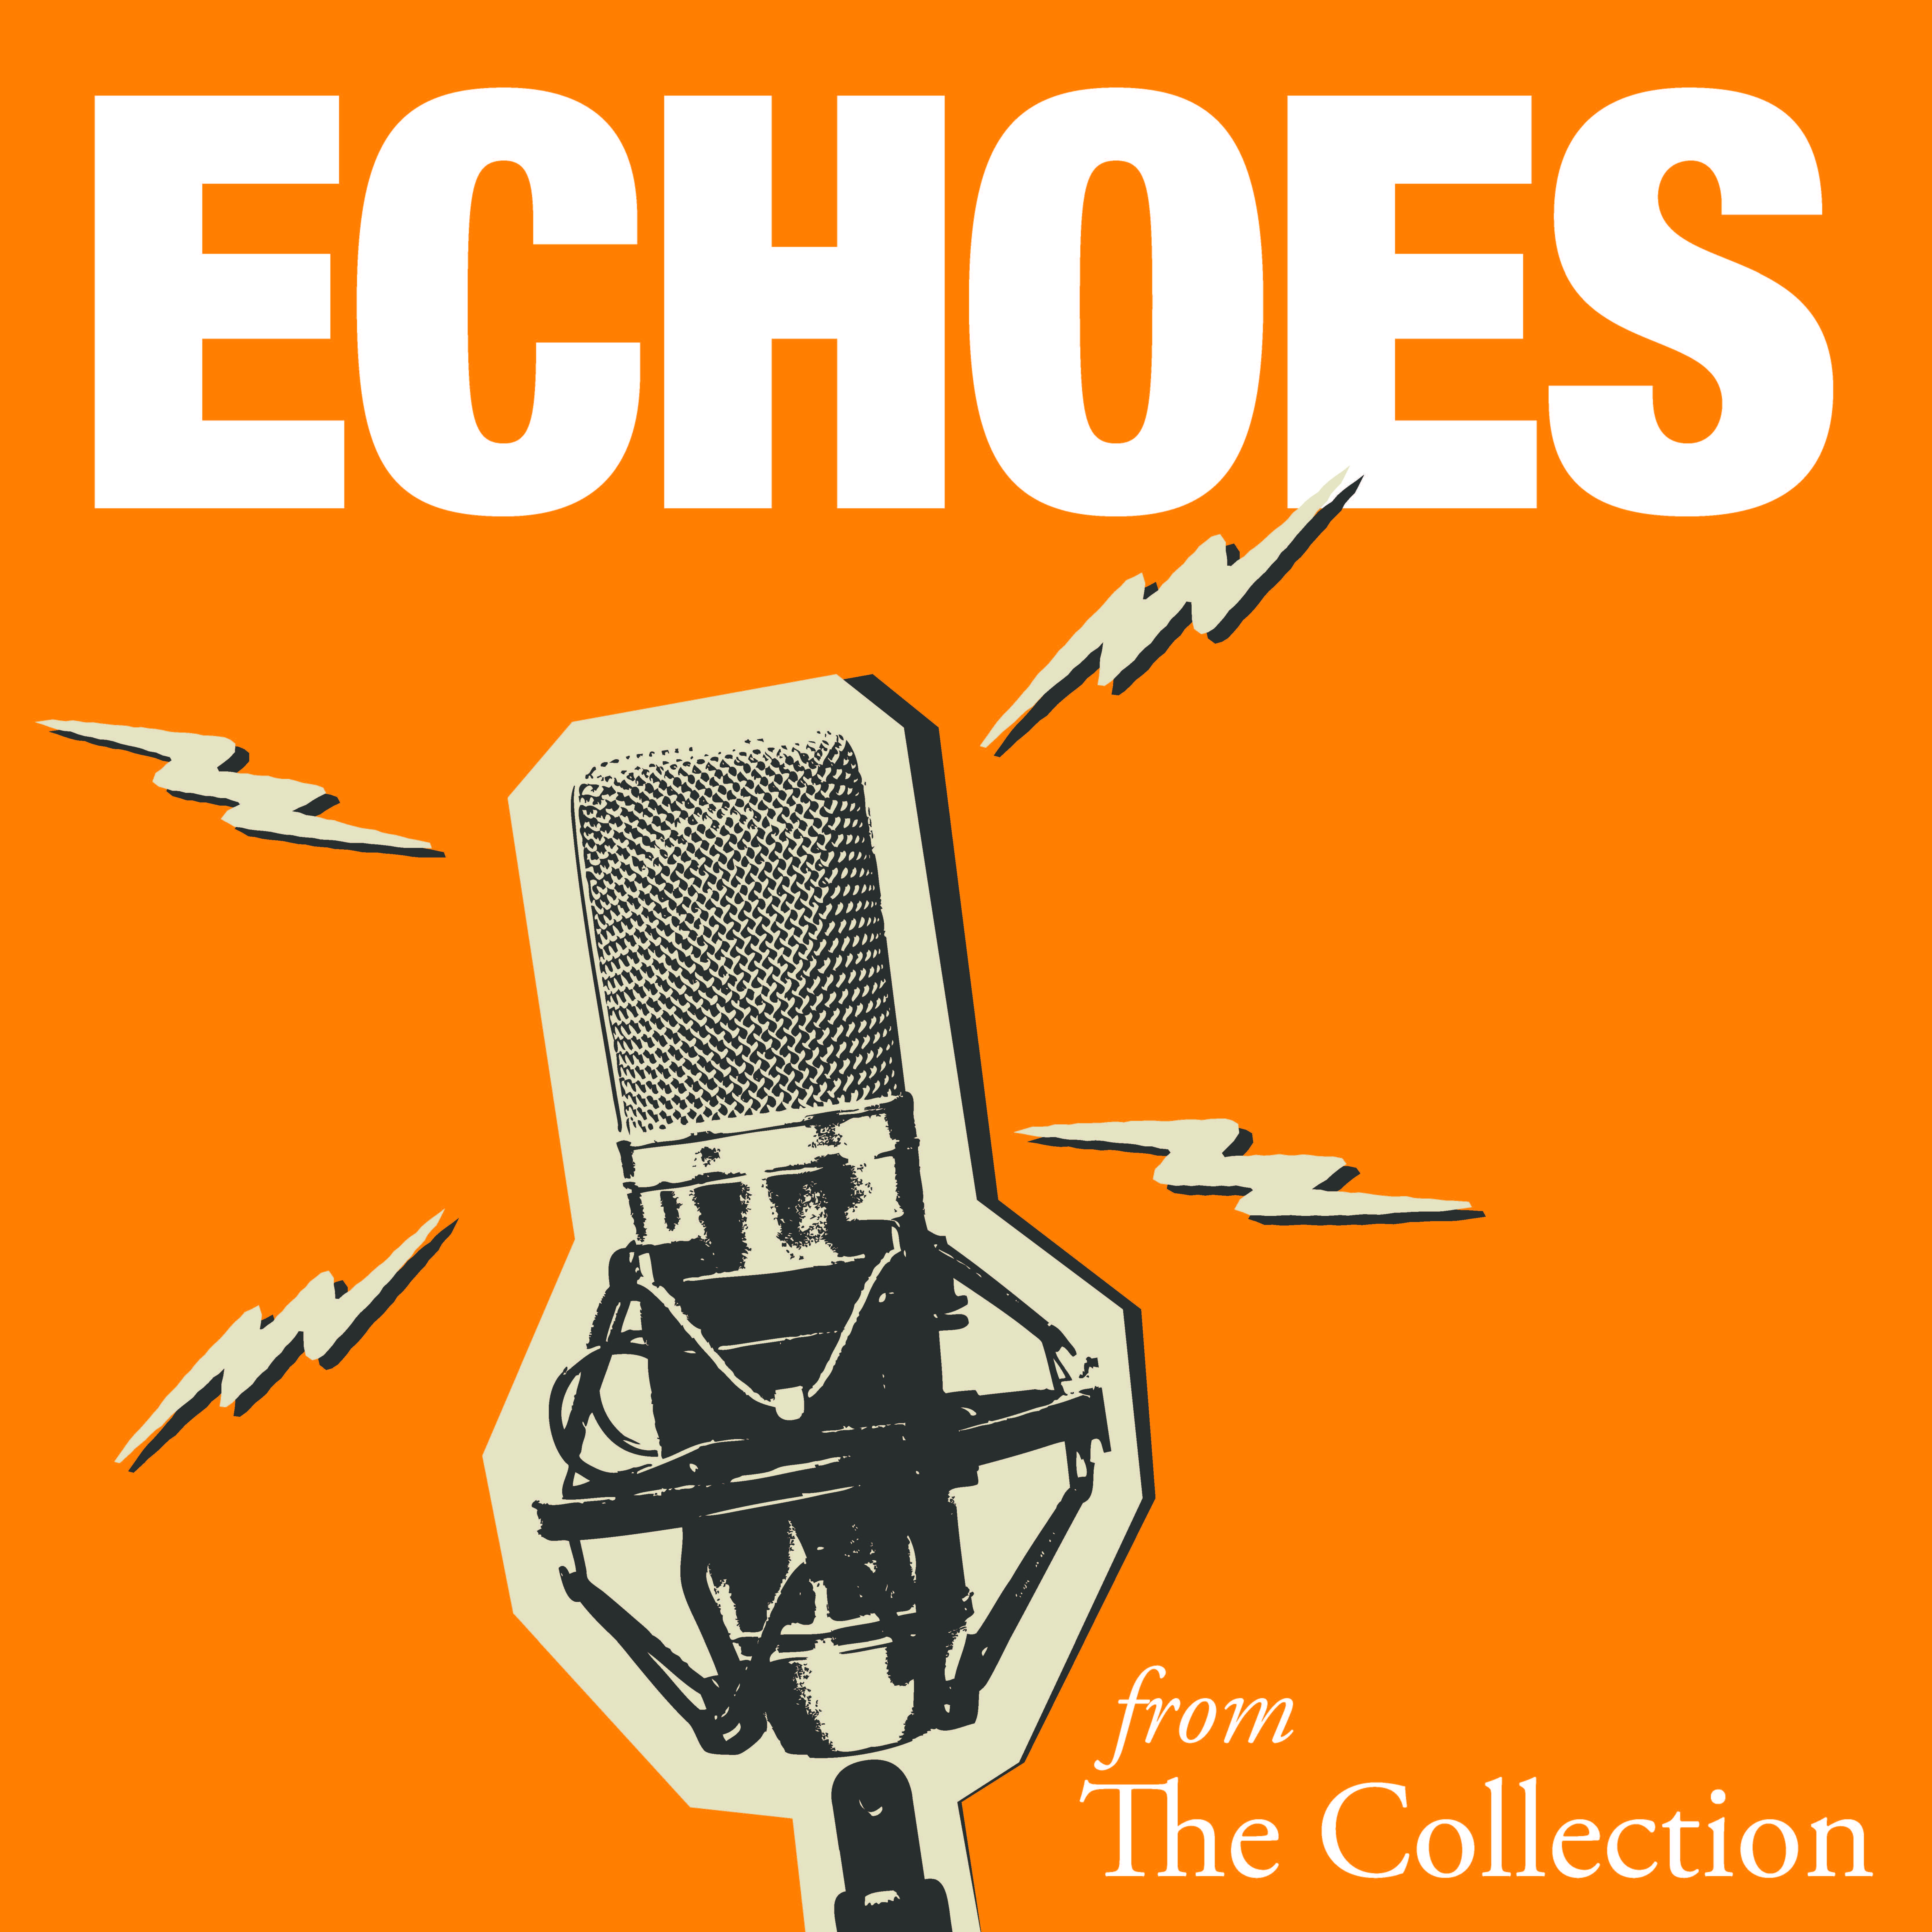 Echoes from the Collection Microphone Graphic